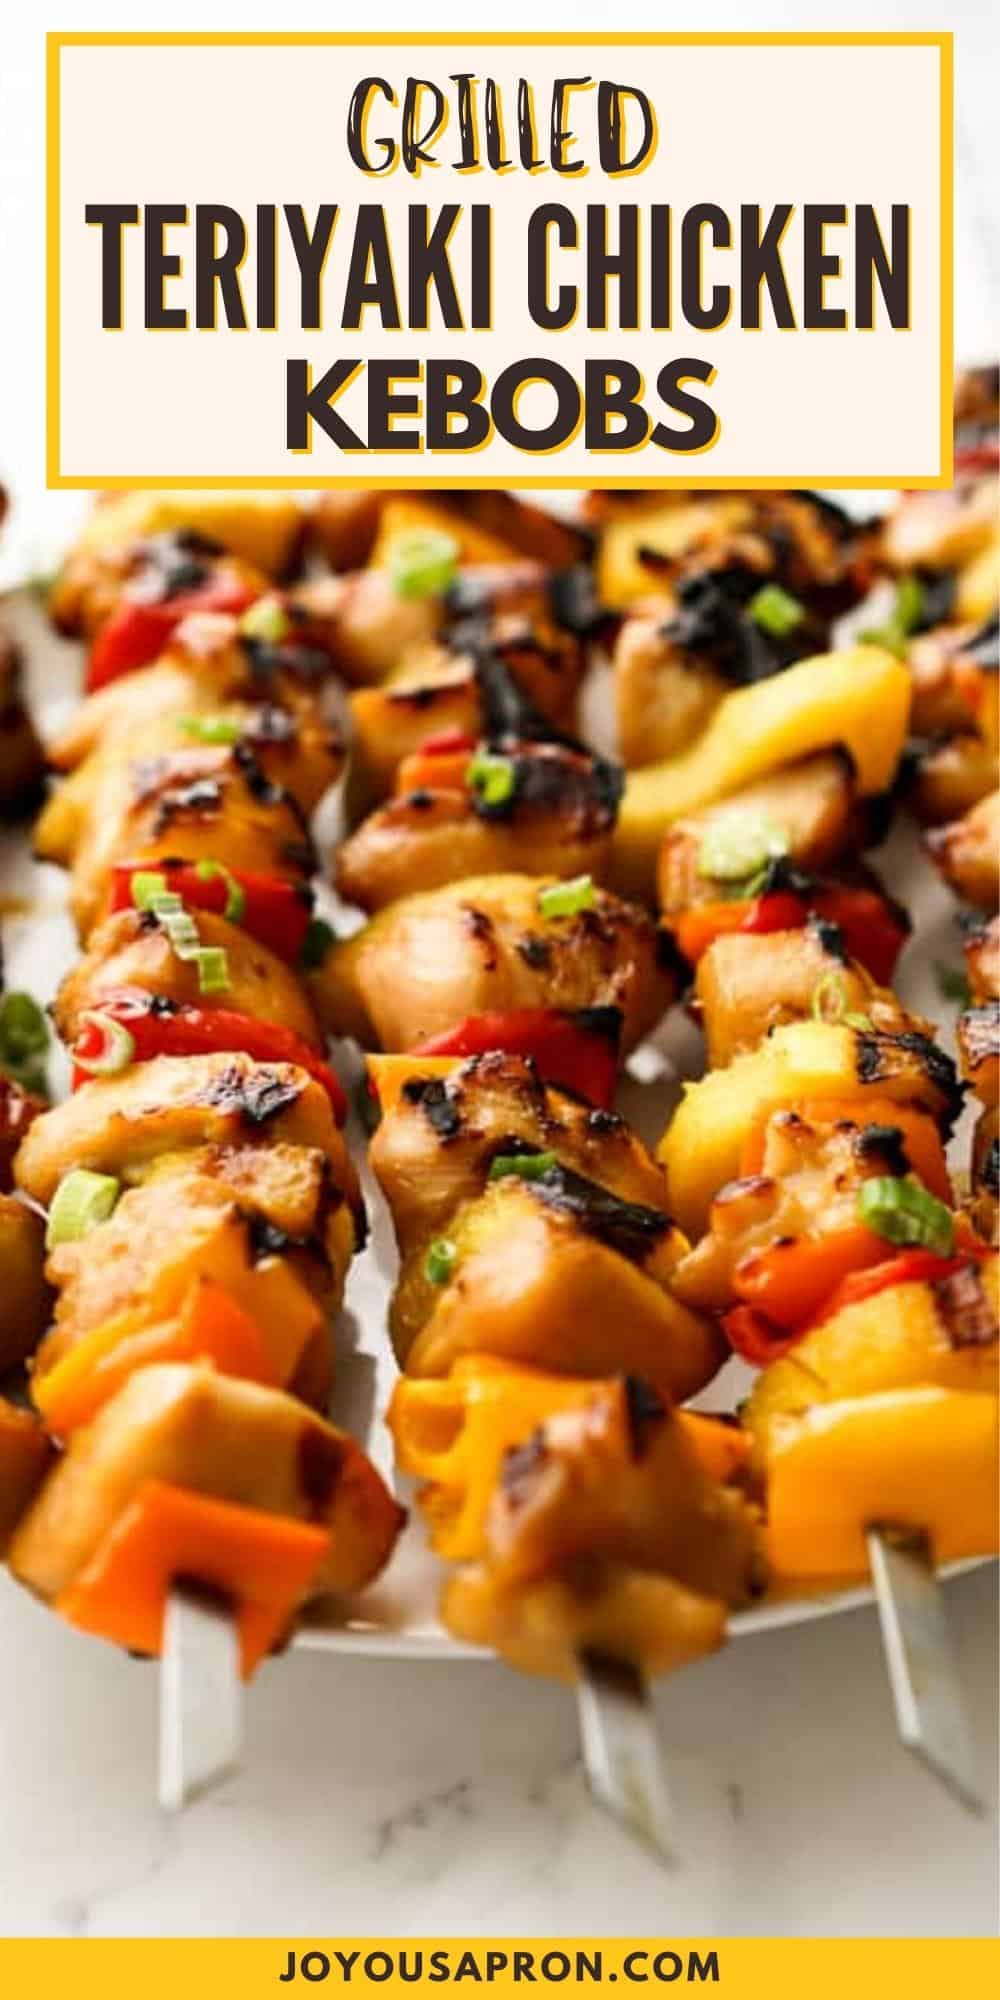 Teriyaki Chicken Skewer - grilled teriyaki marinated chicken, along with pineapple and red bell peppers. An Asian inspired recipe that is flavorful, healthy and easy to make! via @joyousapron